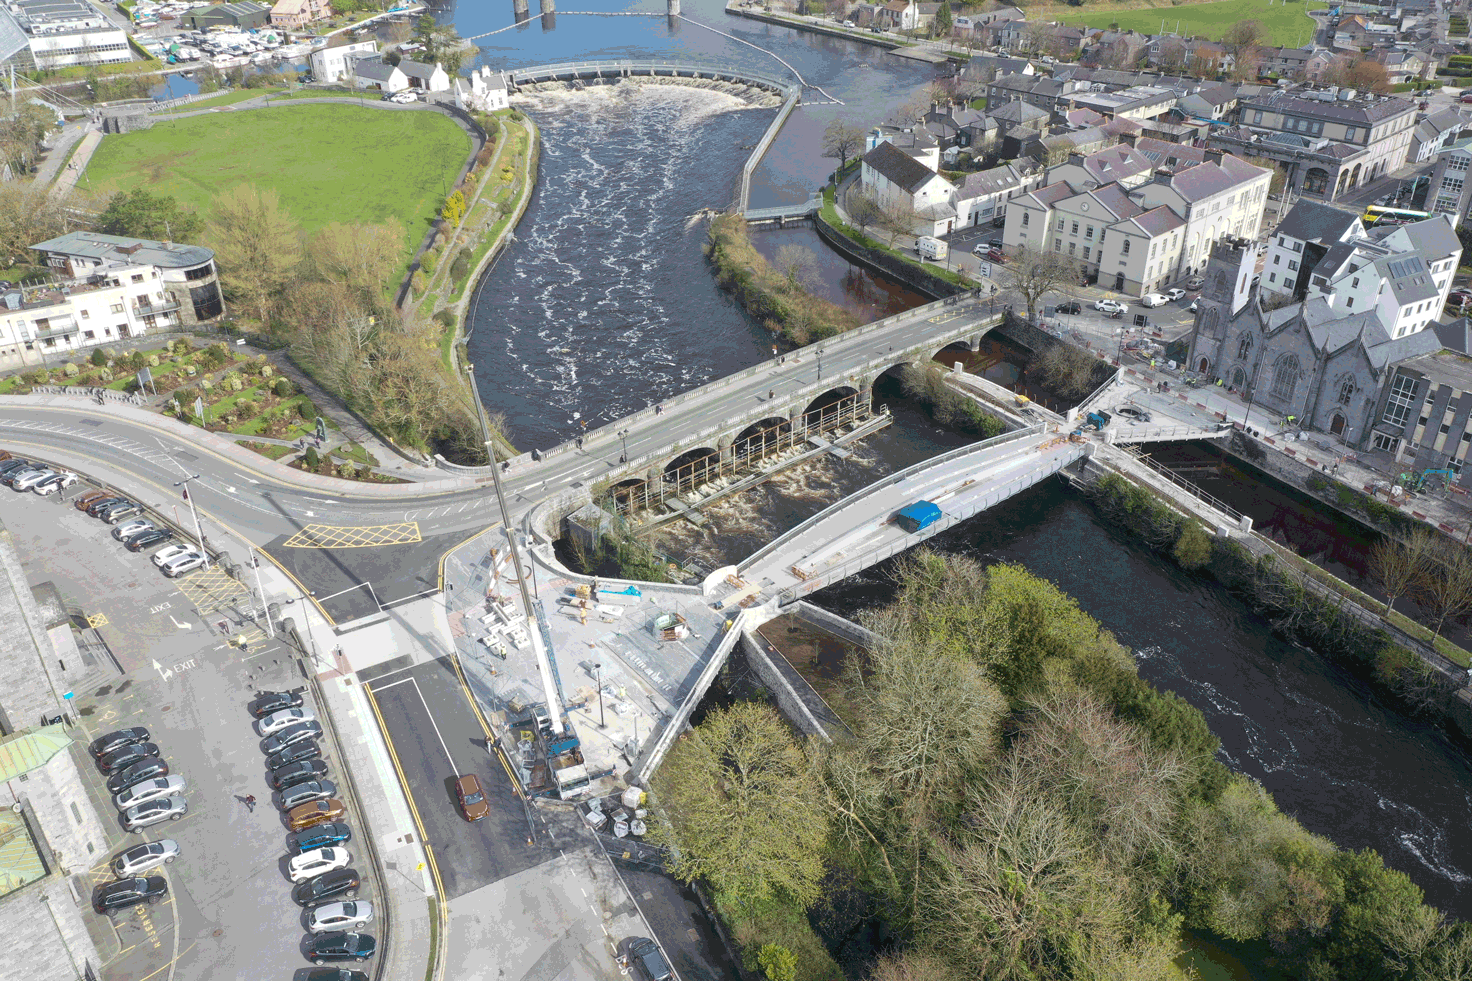 EU Cohesion Policy: New €3 million pedestrian and cycle bridge inaugurated in Galway, Ireland